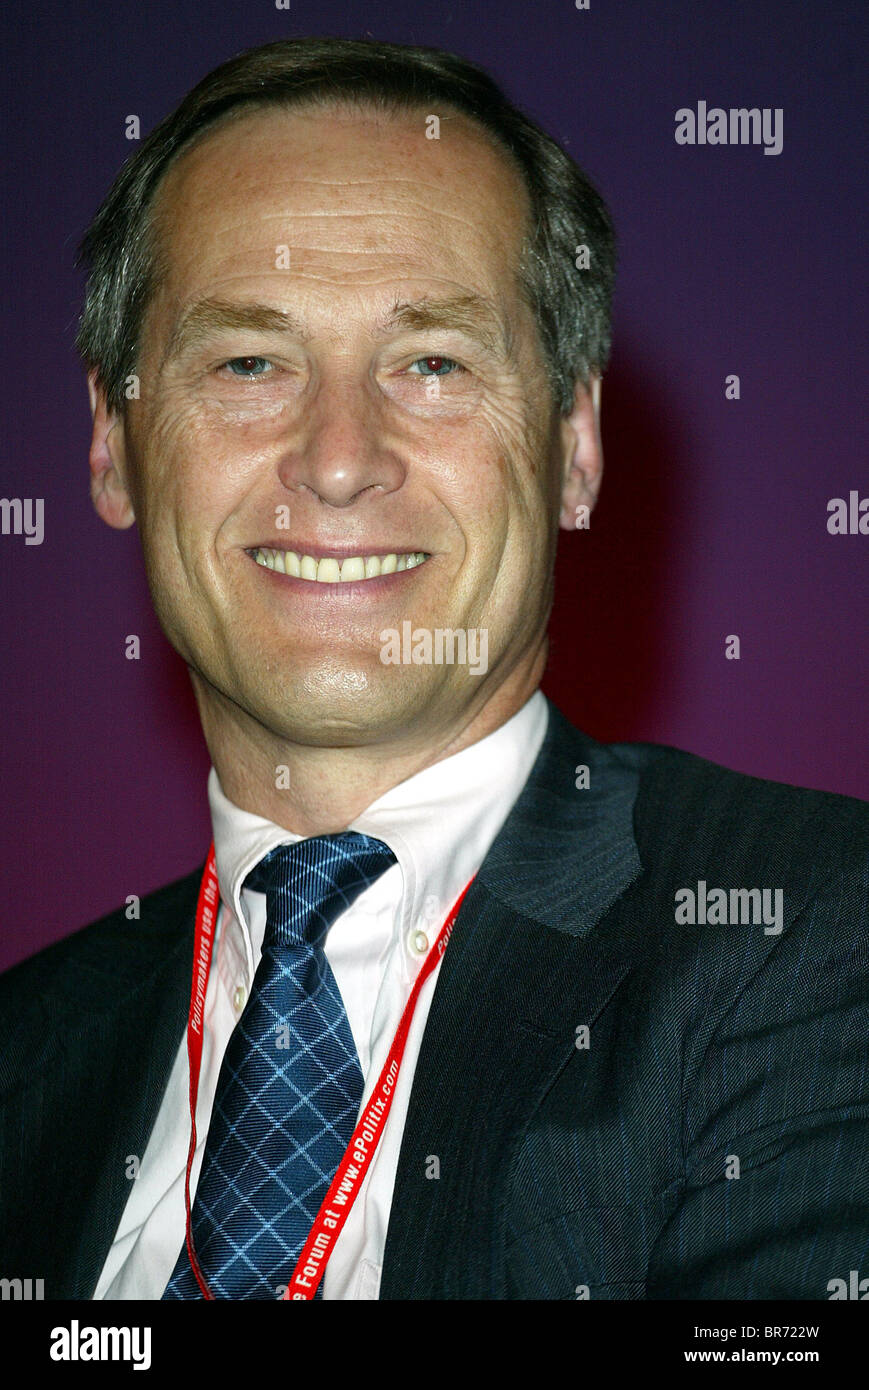 ALAN HOWARTH mp Labour Party 03 ottobre 2002 Labour Party CONFERENCE 2002 Blackpool Inghilterra Foto Stock